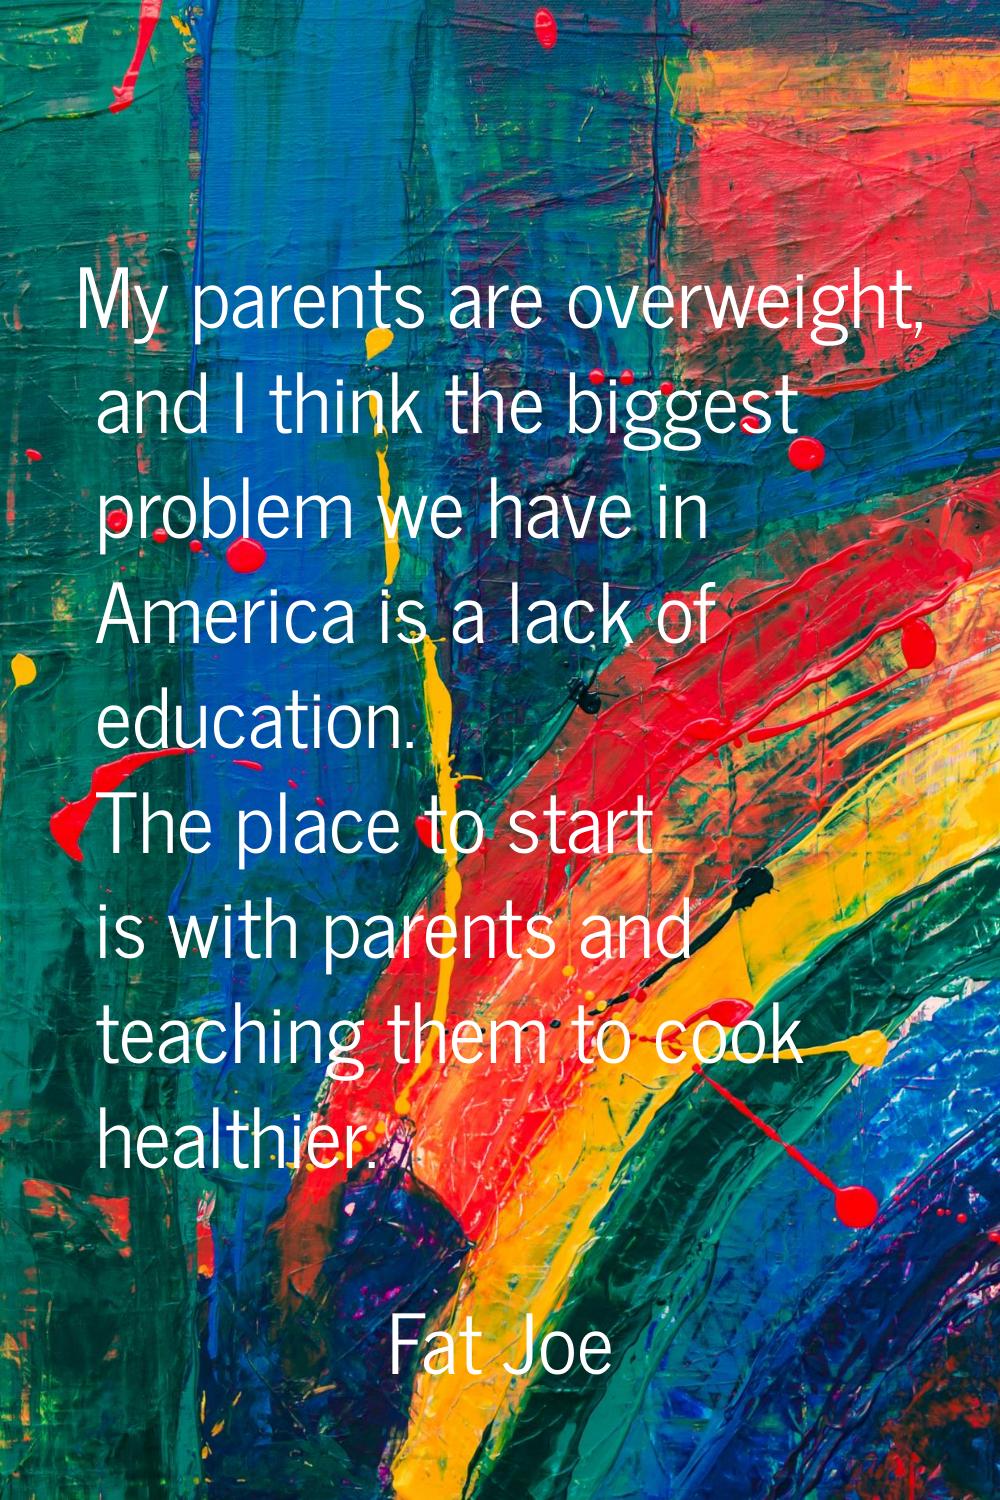 My parents are overweight, and I think the biggest problem we have in America is a lack of educatio